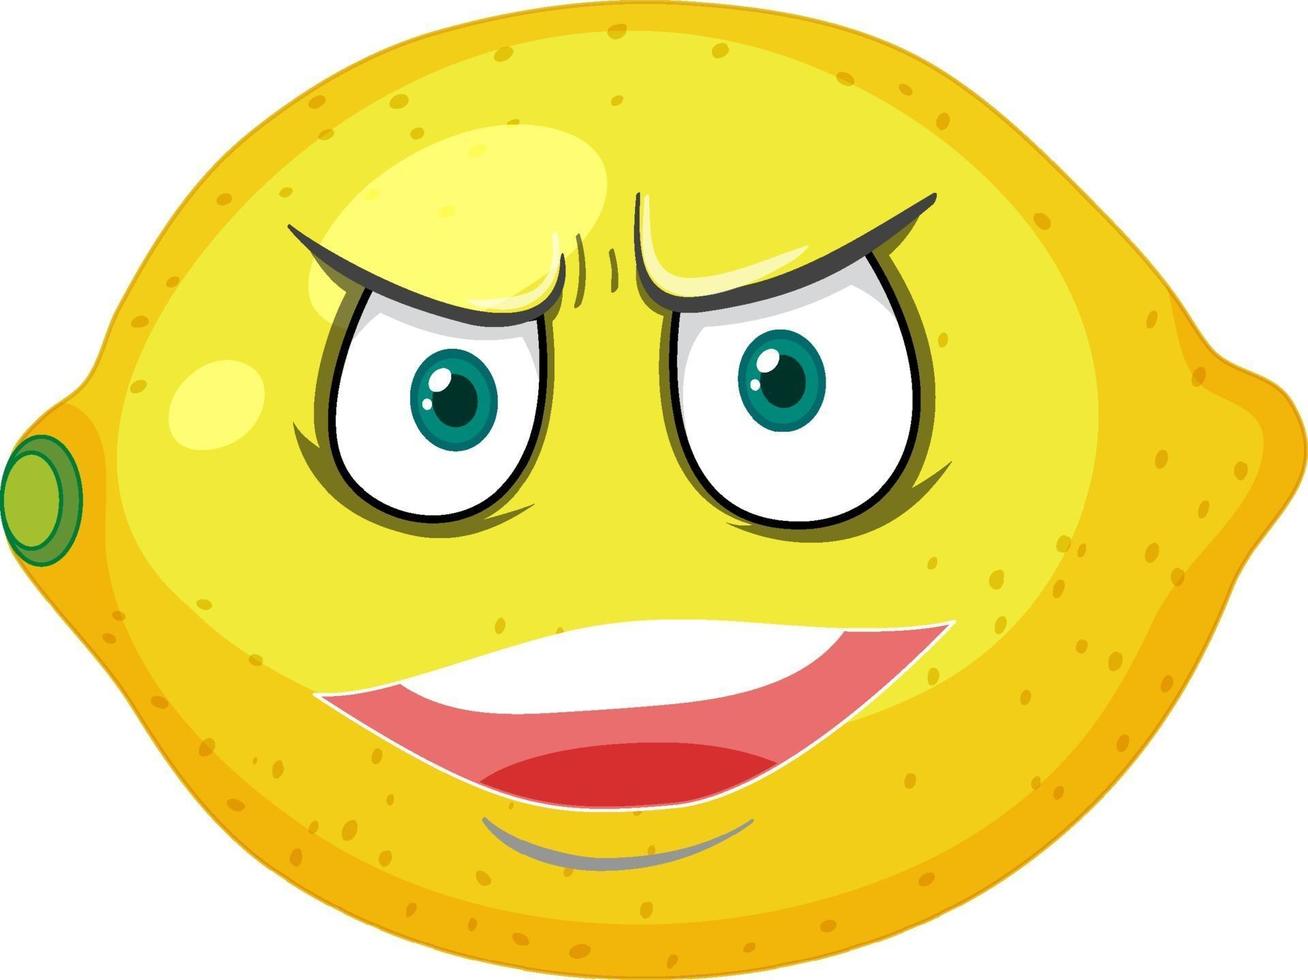 Lemon cartoon character with angry face expression on white background vector